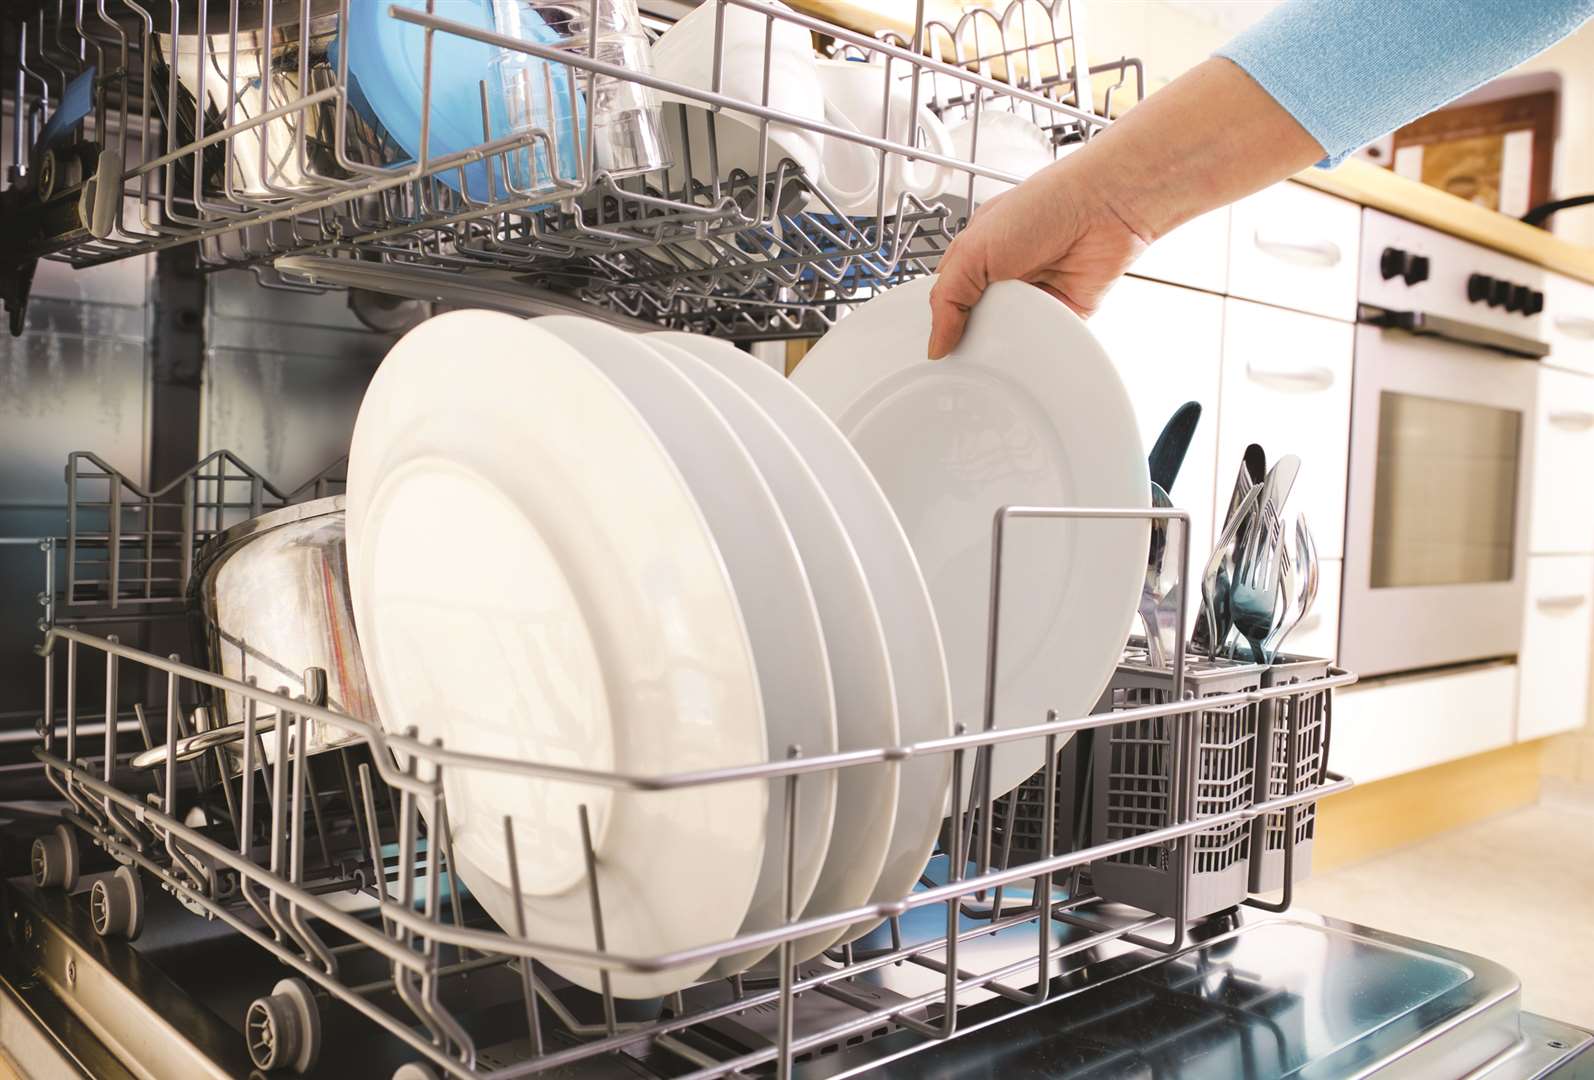 The fire did not spread from the dishwasher. Stock pic